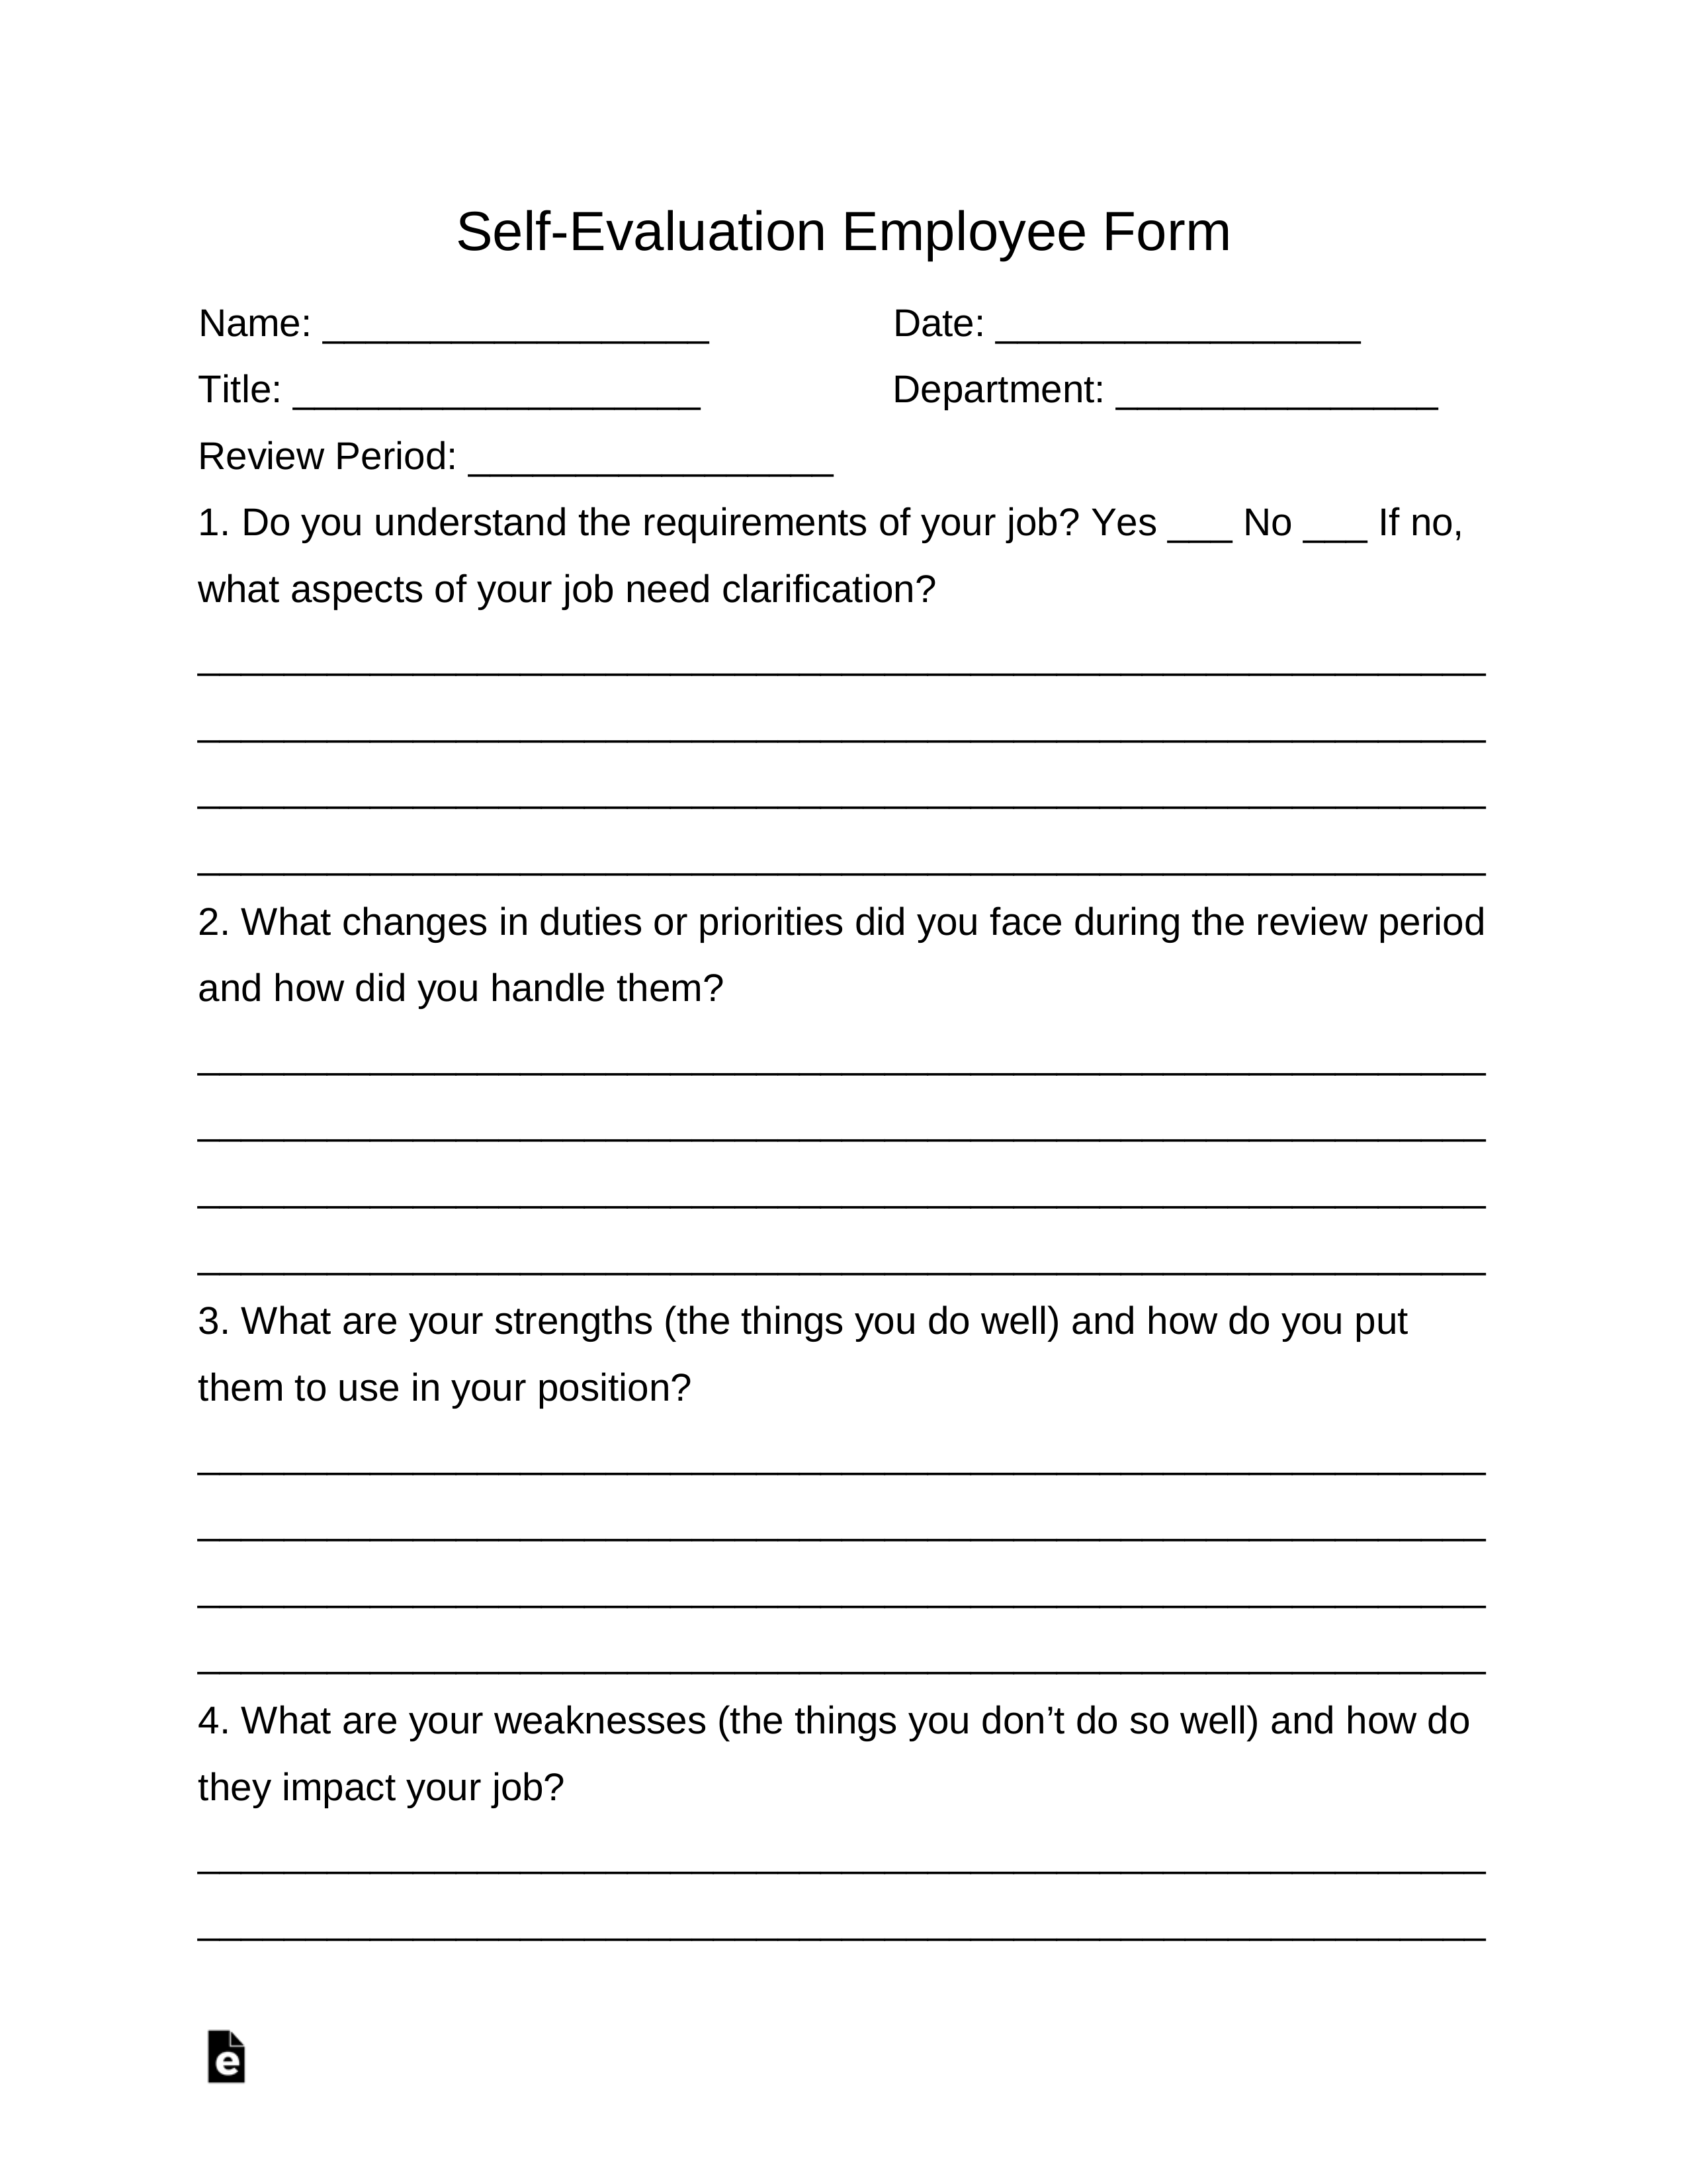 sample-employee-self-evaluation-form-14-free-documents-in-word-pdf-a50